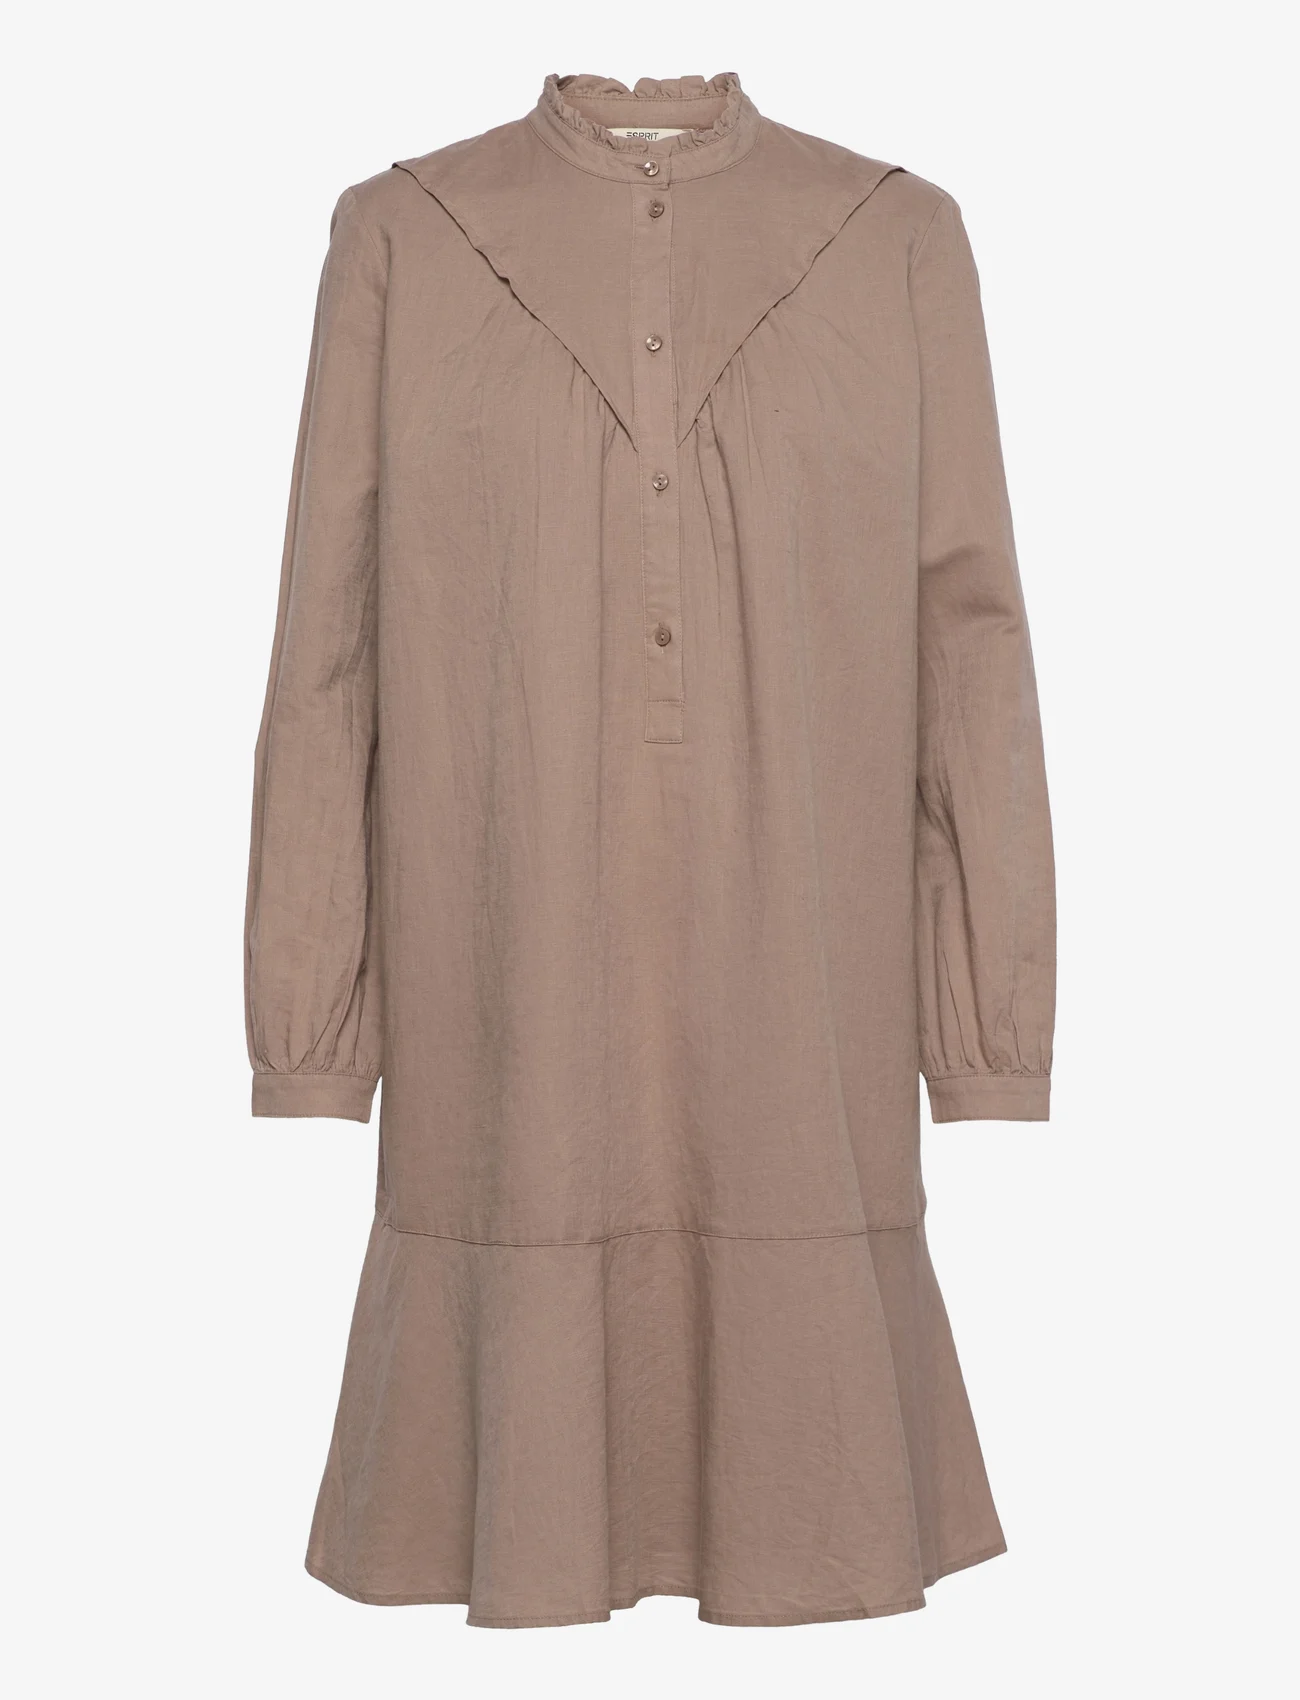 Esprit Casual - Dress in blended linen - shirt dresses - taupe - 0